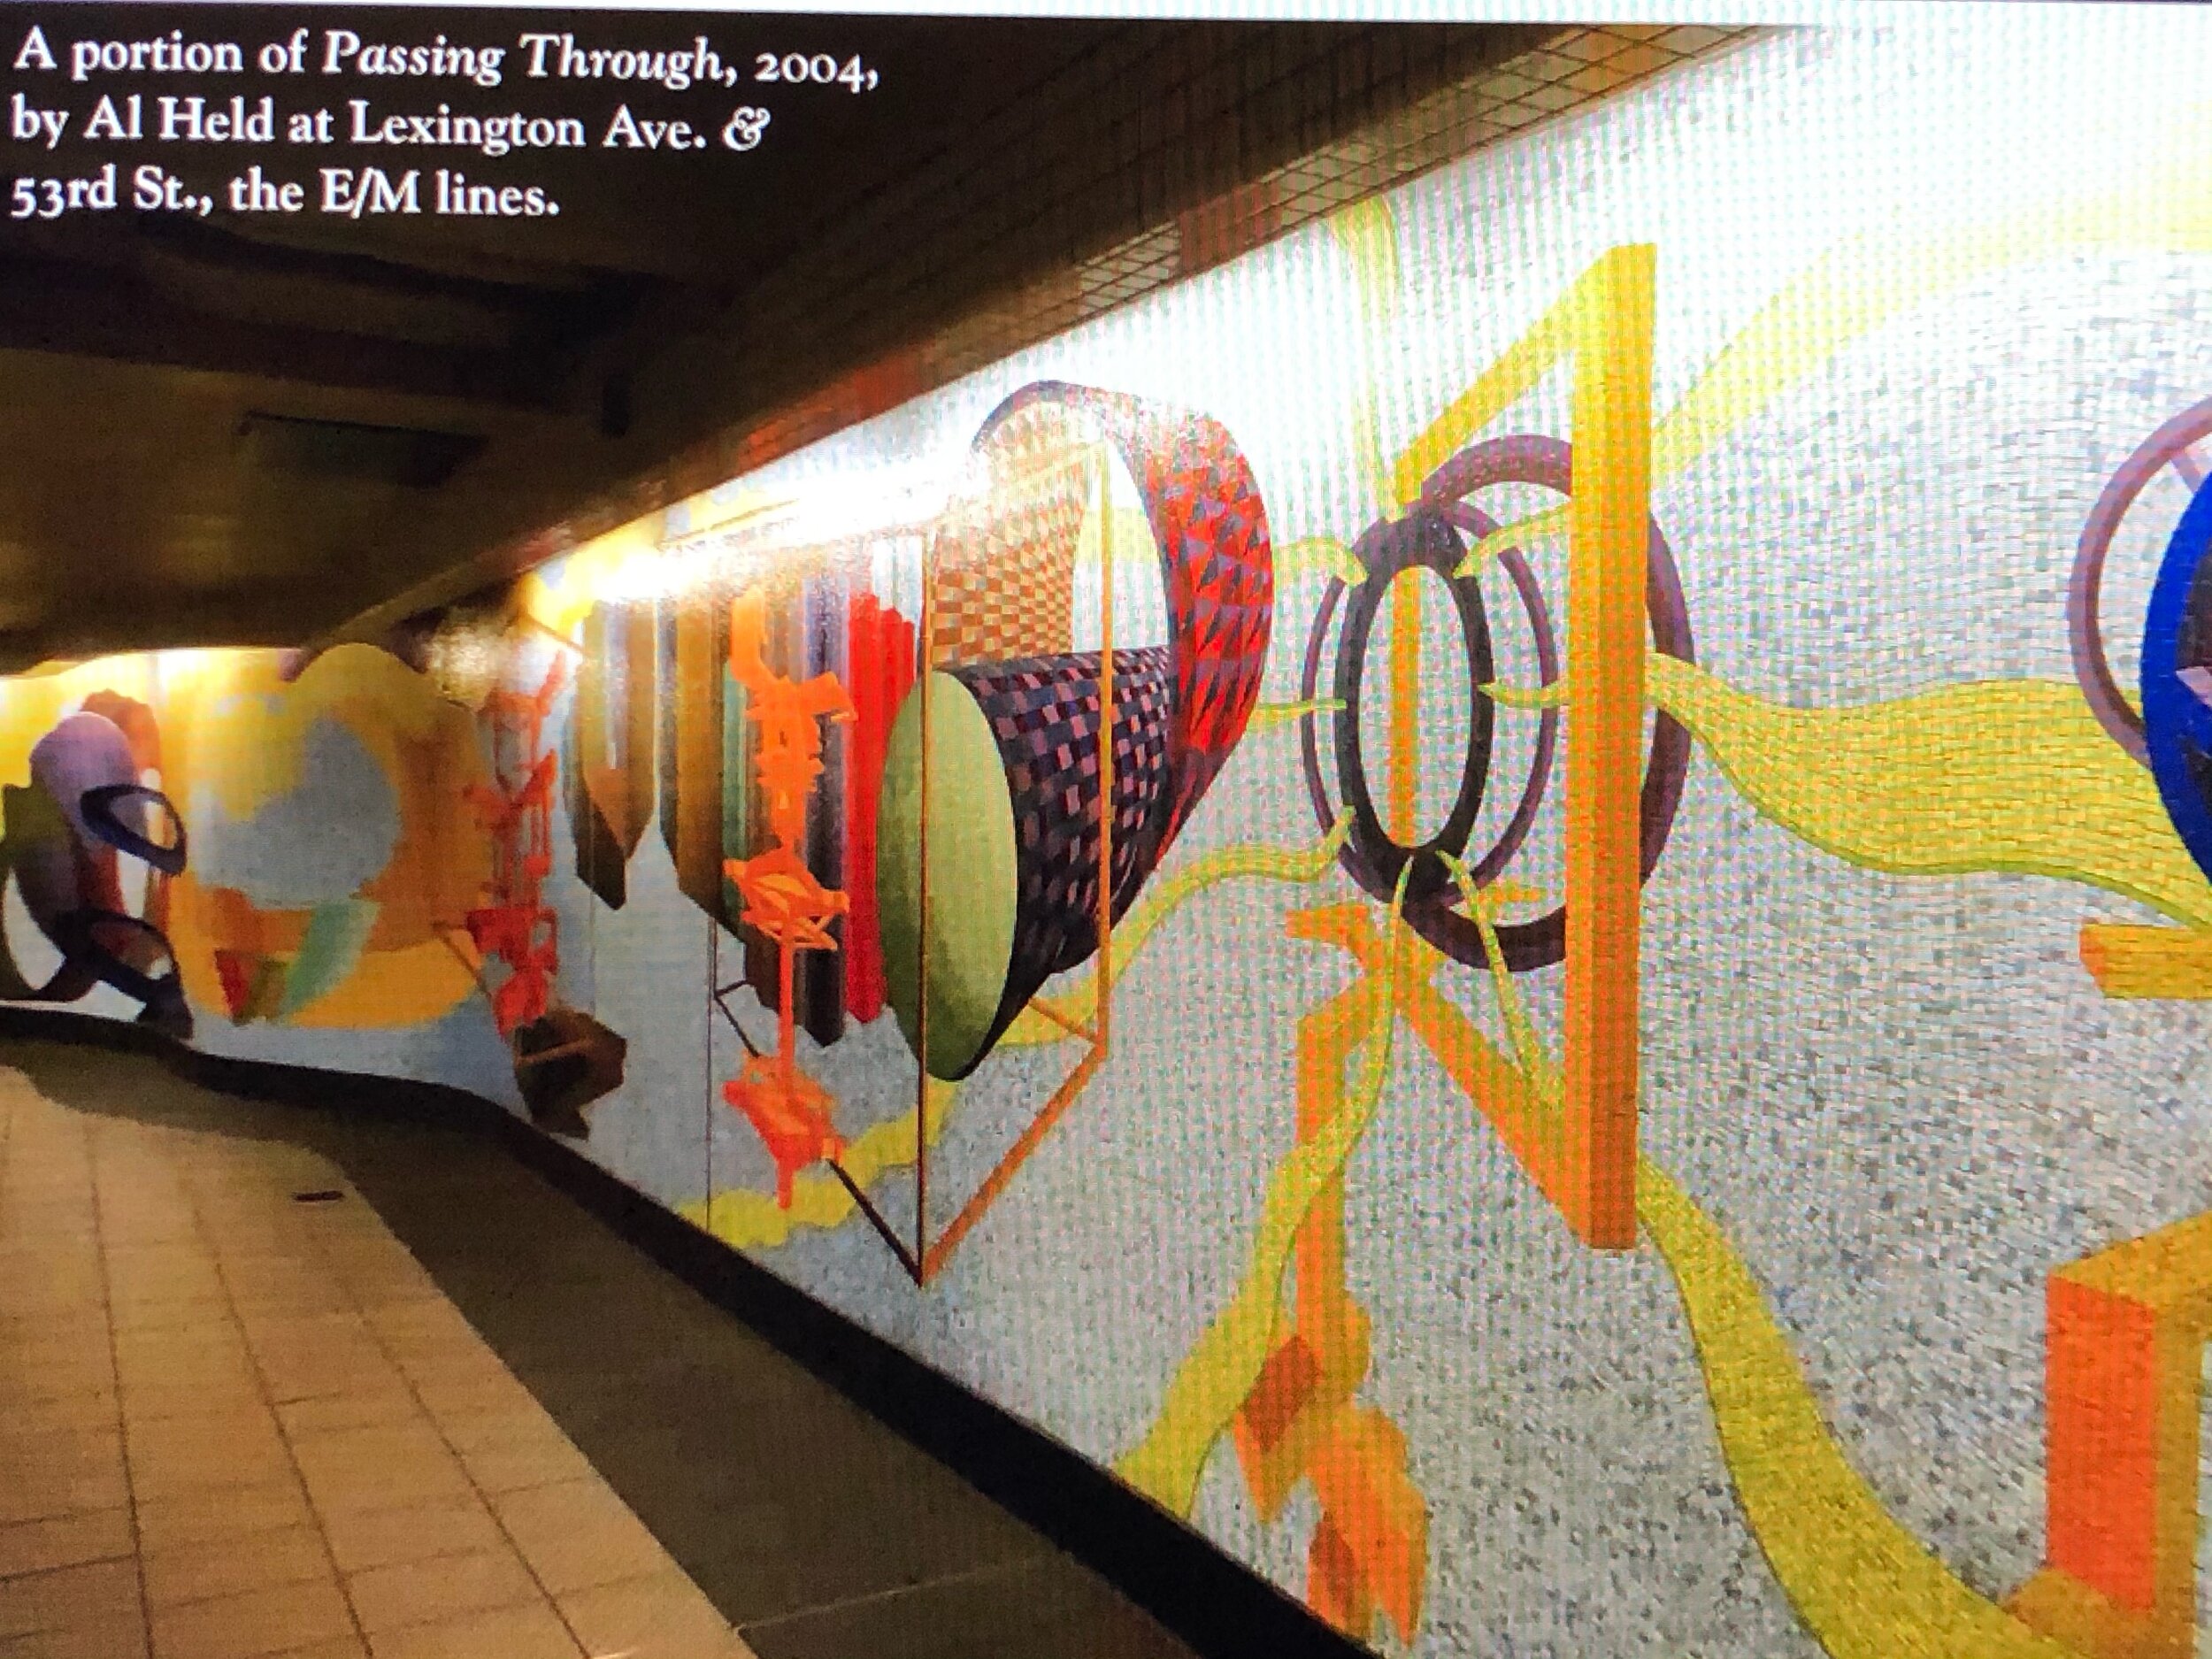 A MASNYC subway art tour with Phil Desiere.  We've taken real live ones with him during our NYC sojourns.